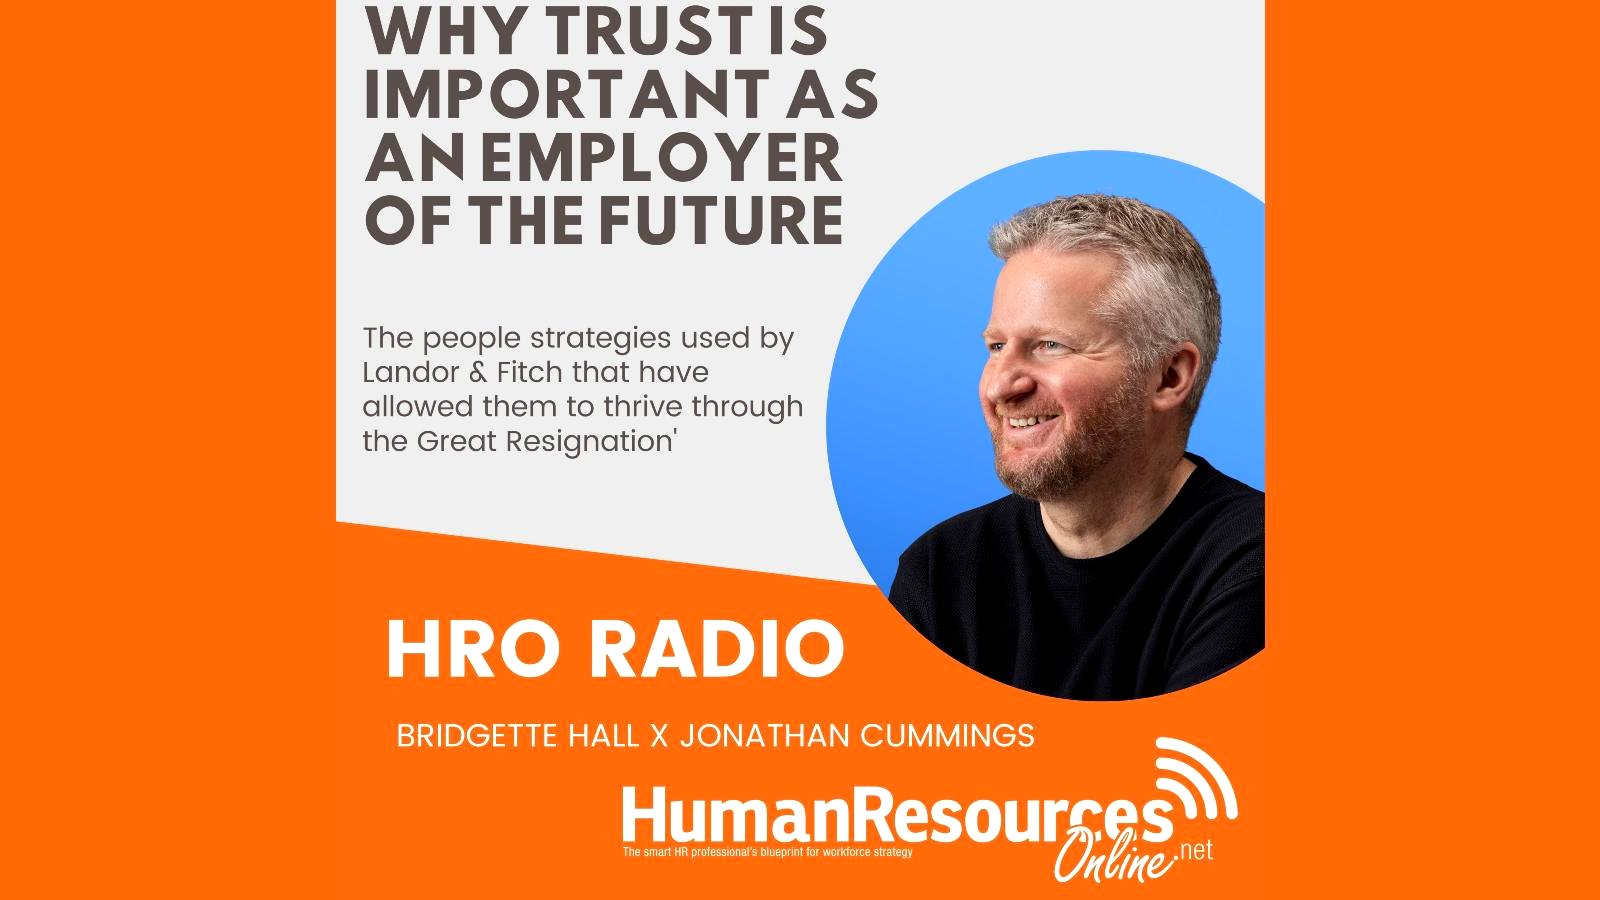 Podcast: HRadiO with Jonathan Cummings, APAC President, Landor & Fitch